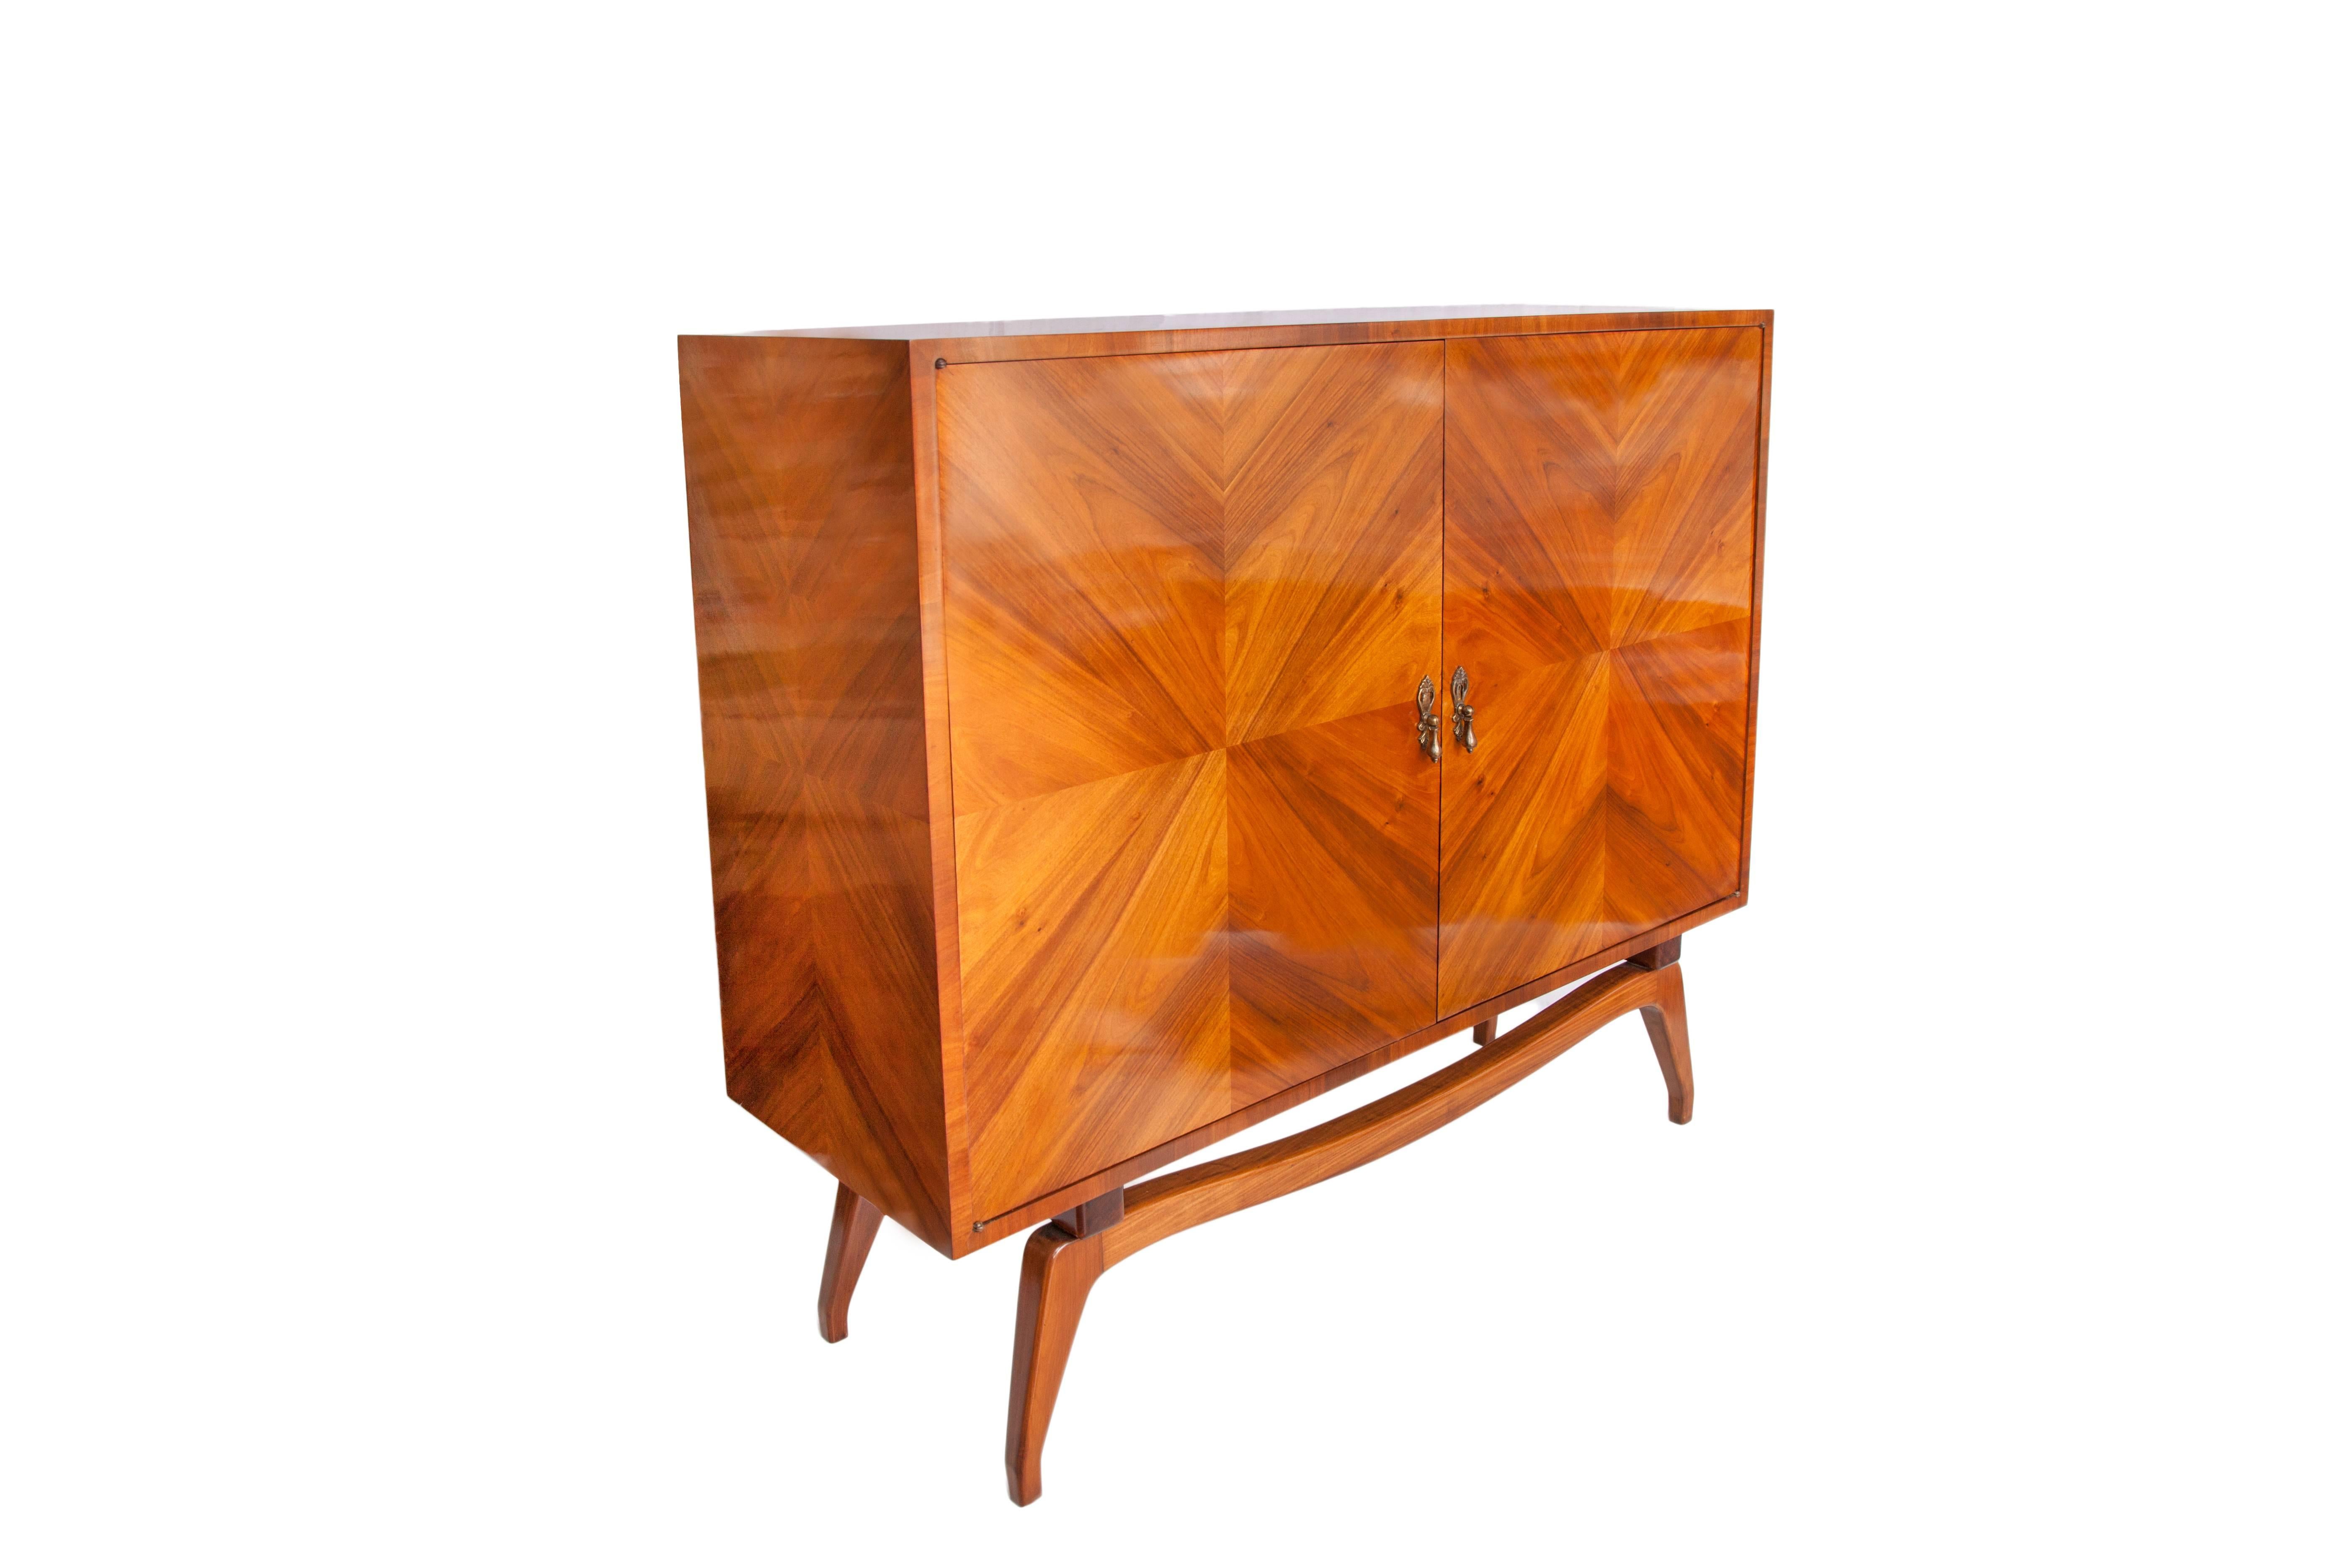 Brazilian modern bar produced, circa 1950. Crafted in caviuna wood with mirrored and Formica interior. Artistically placed wooden panels on the exterior form a geometric design. The bar remains in good vintage condition with wear appropriate to age